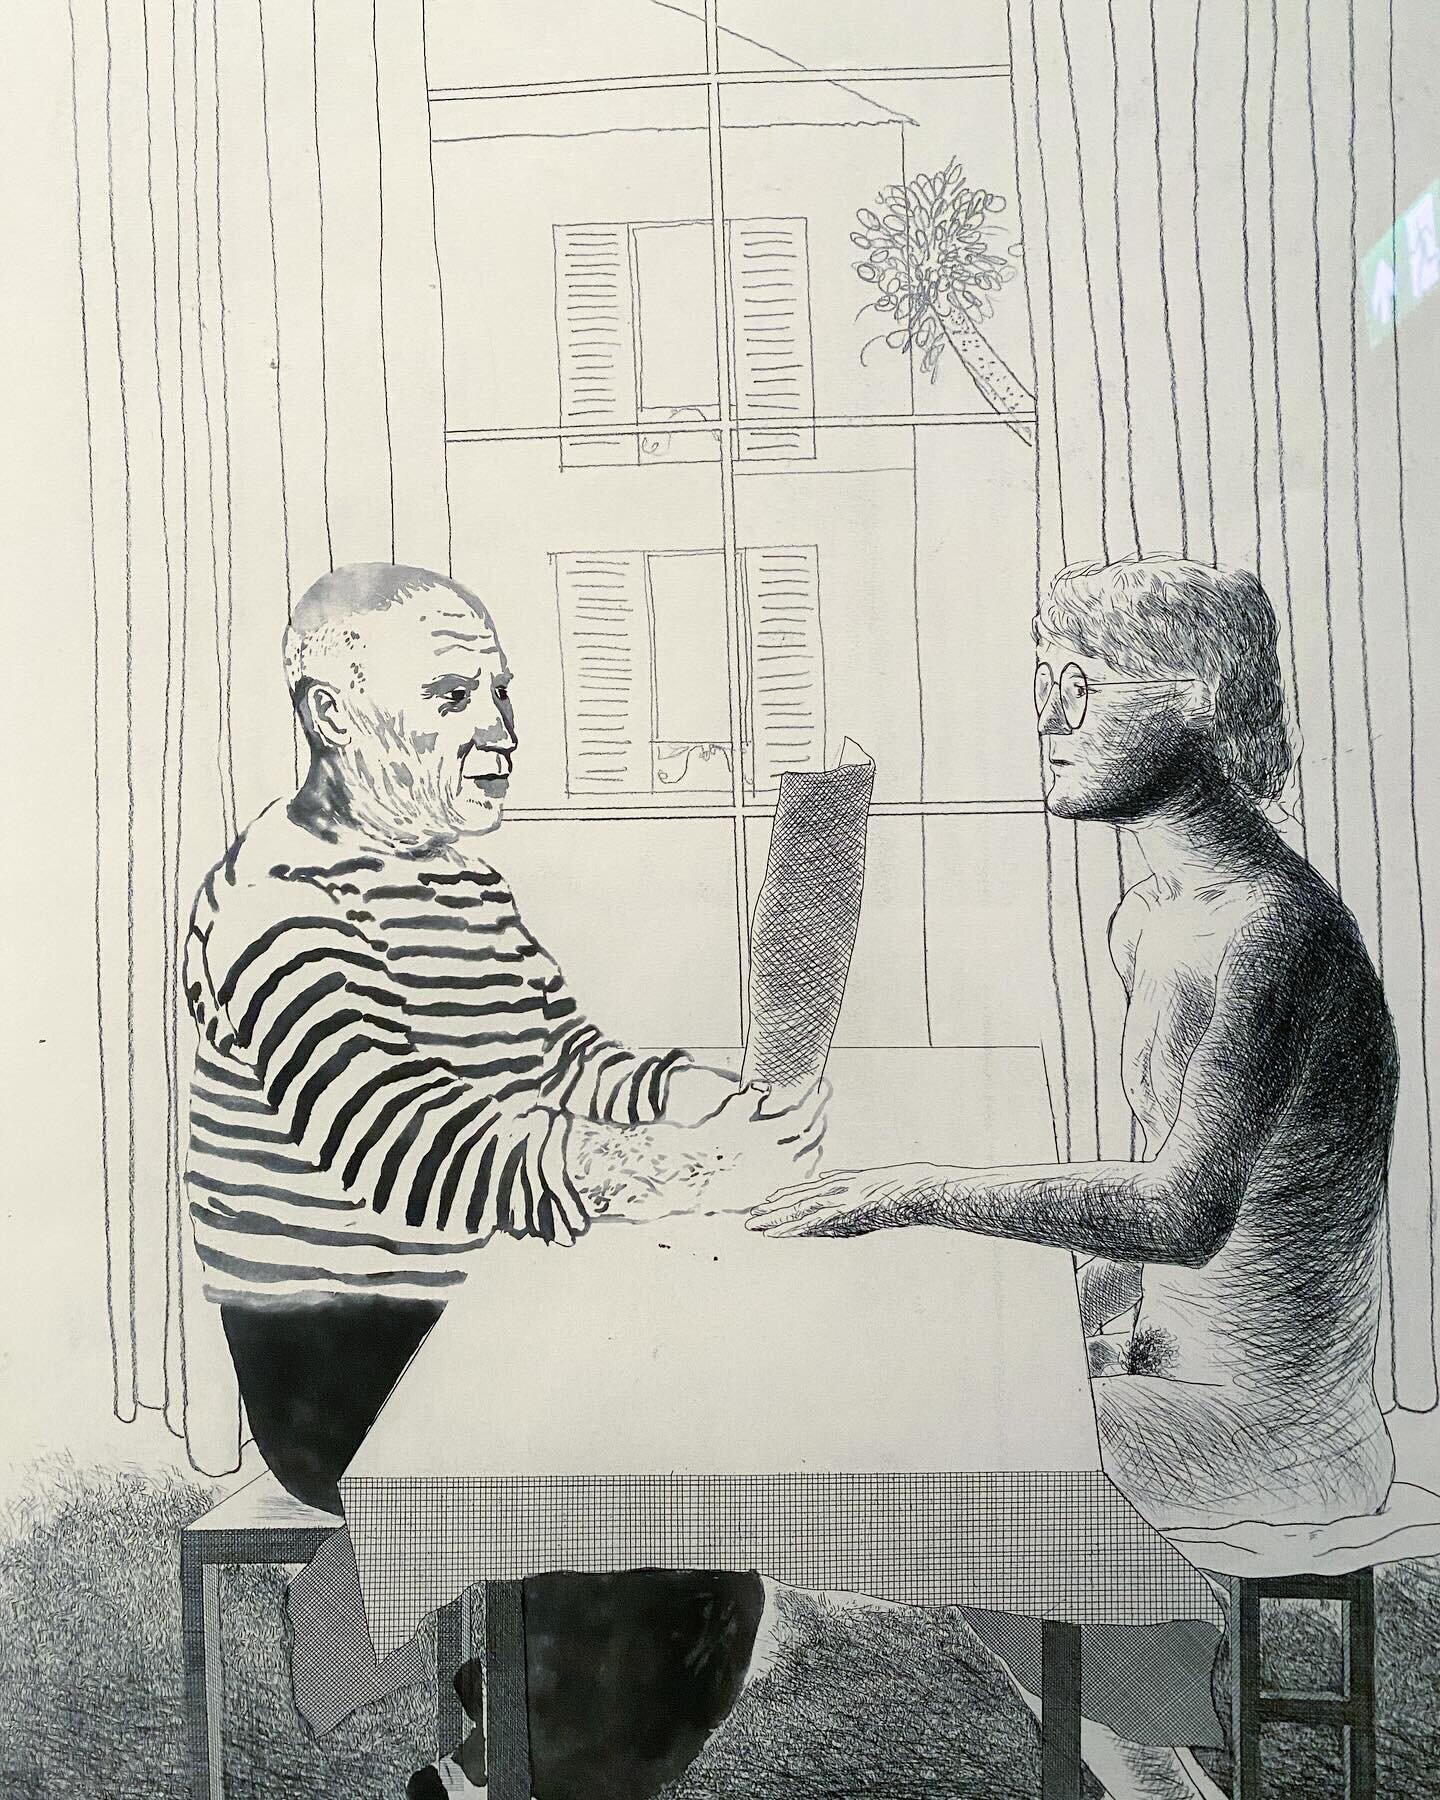 Found some time after my workshops at the @nationalportraitgallery to pop in and see the #davidhockney #drawingfromlife show before it shuts this week ✍🏻🎟️